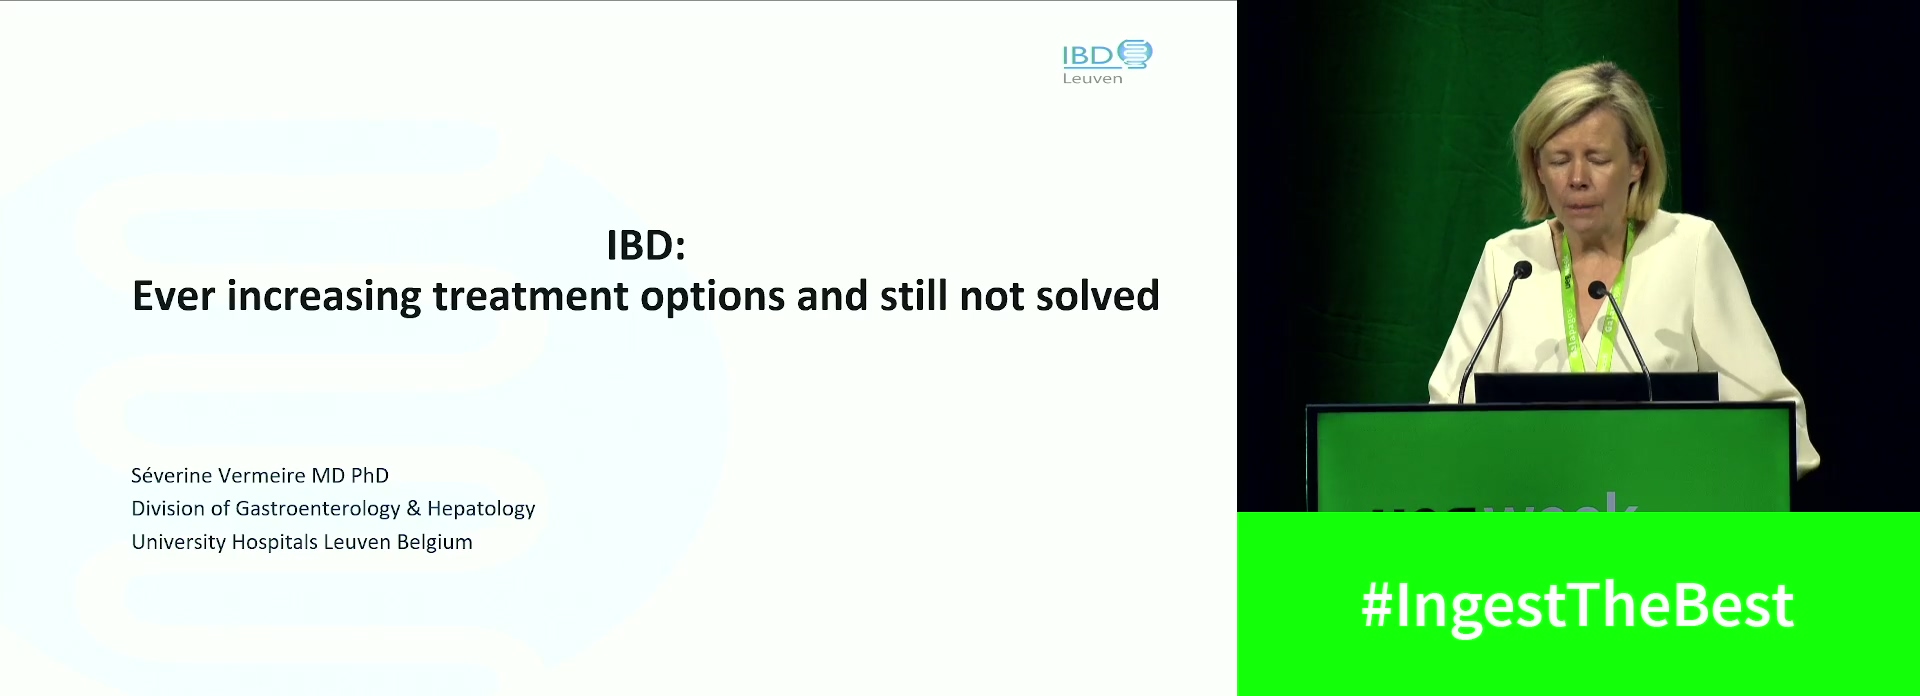 IBD: Ever increasing treatment options and still not solved